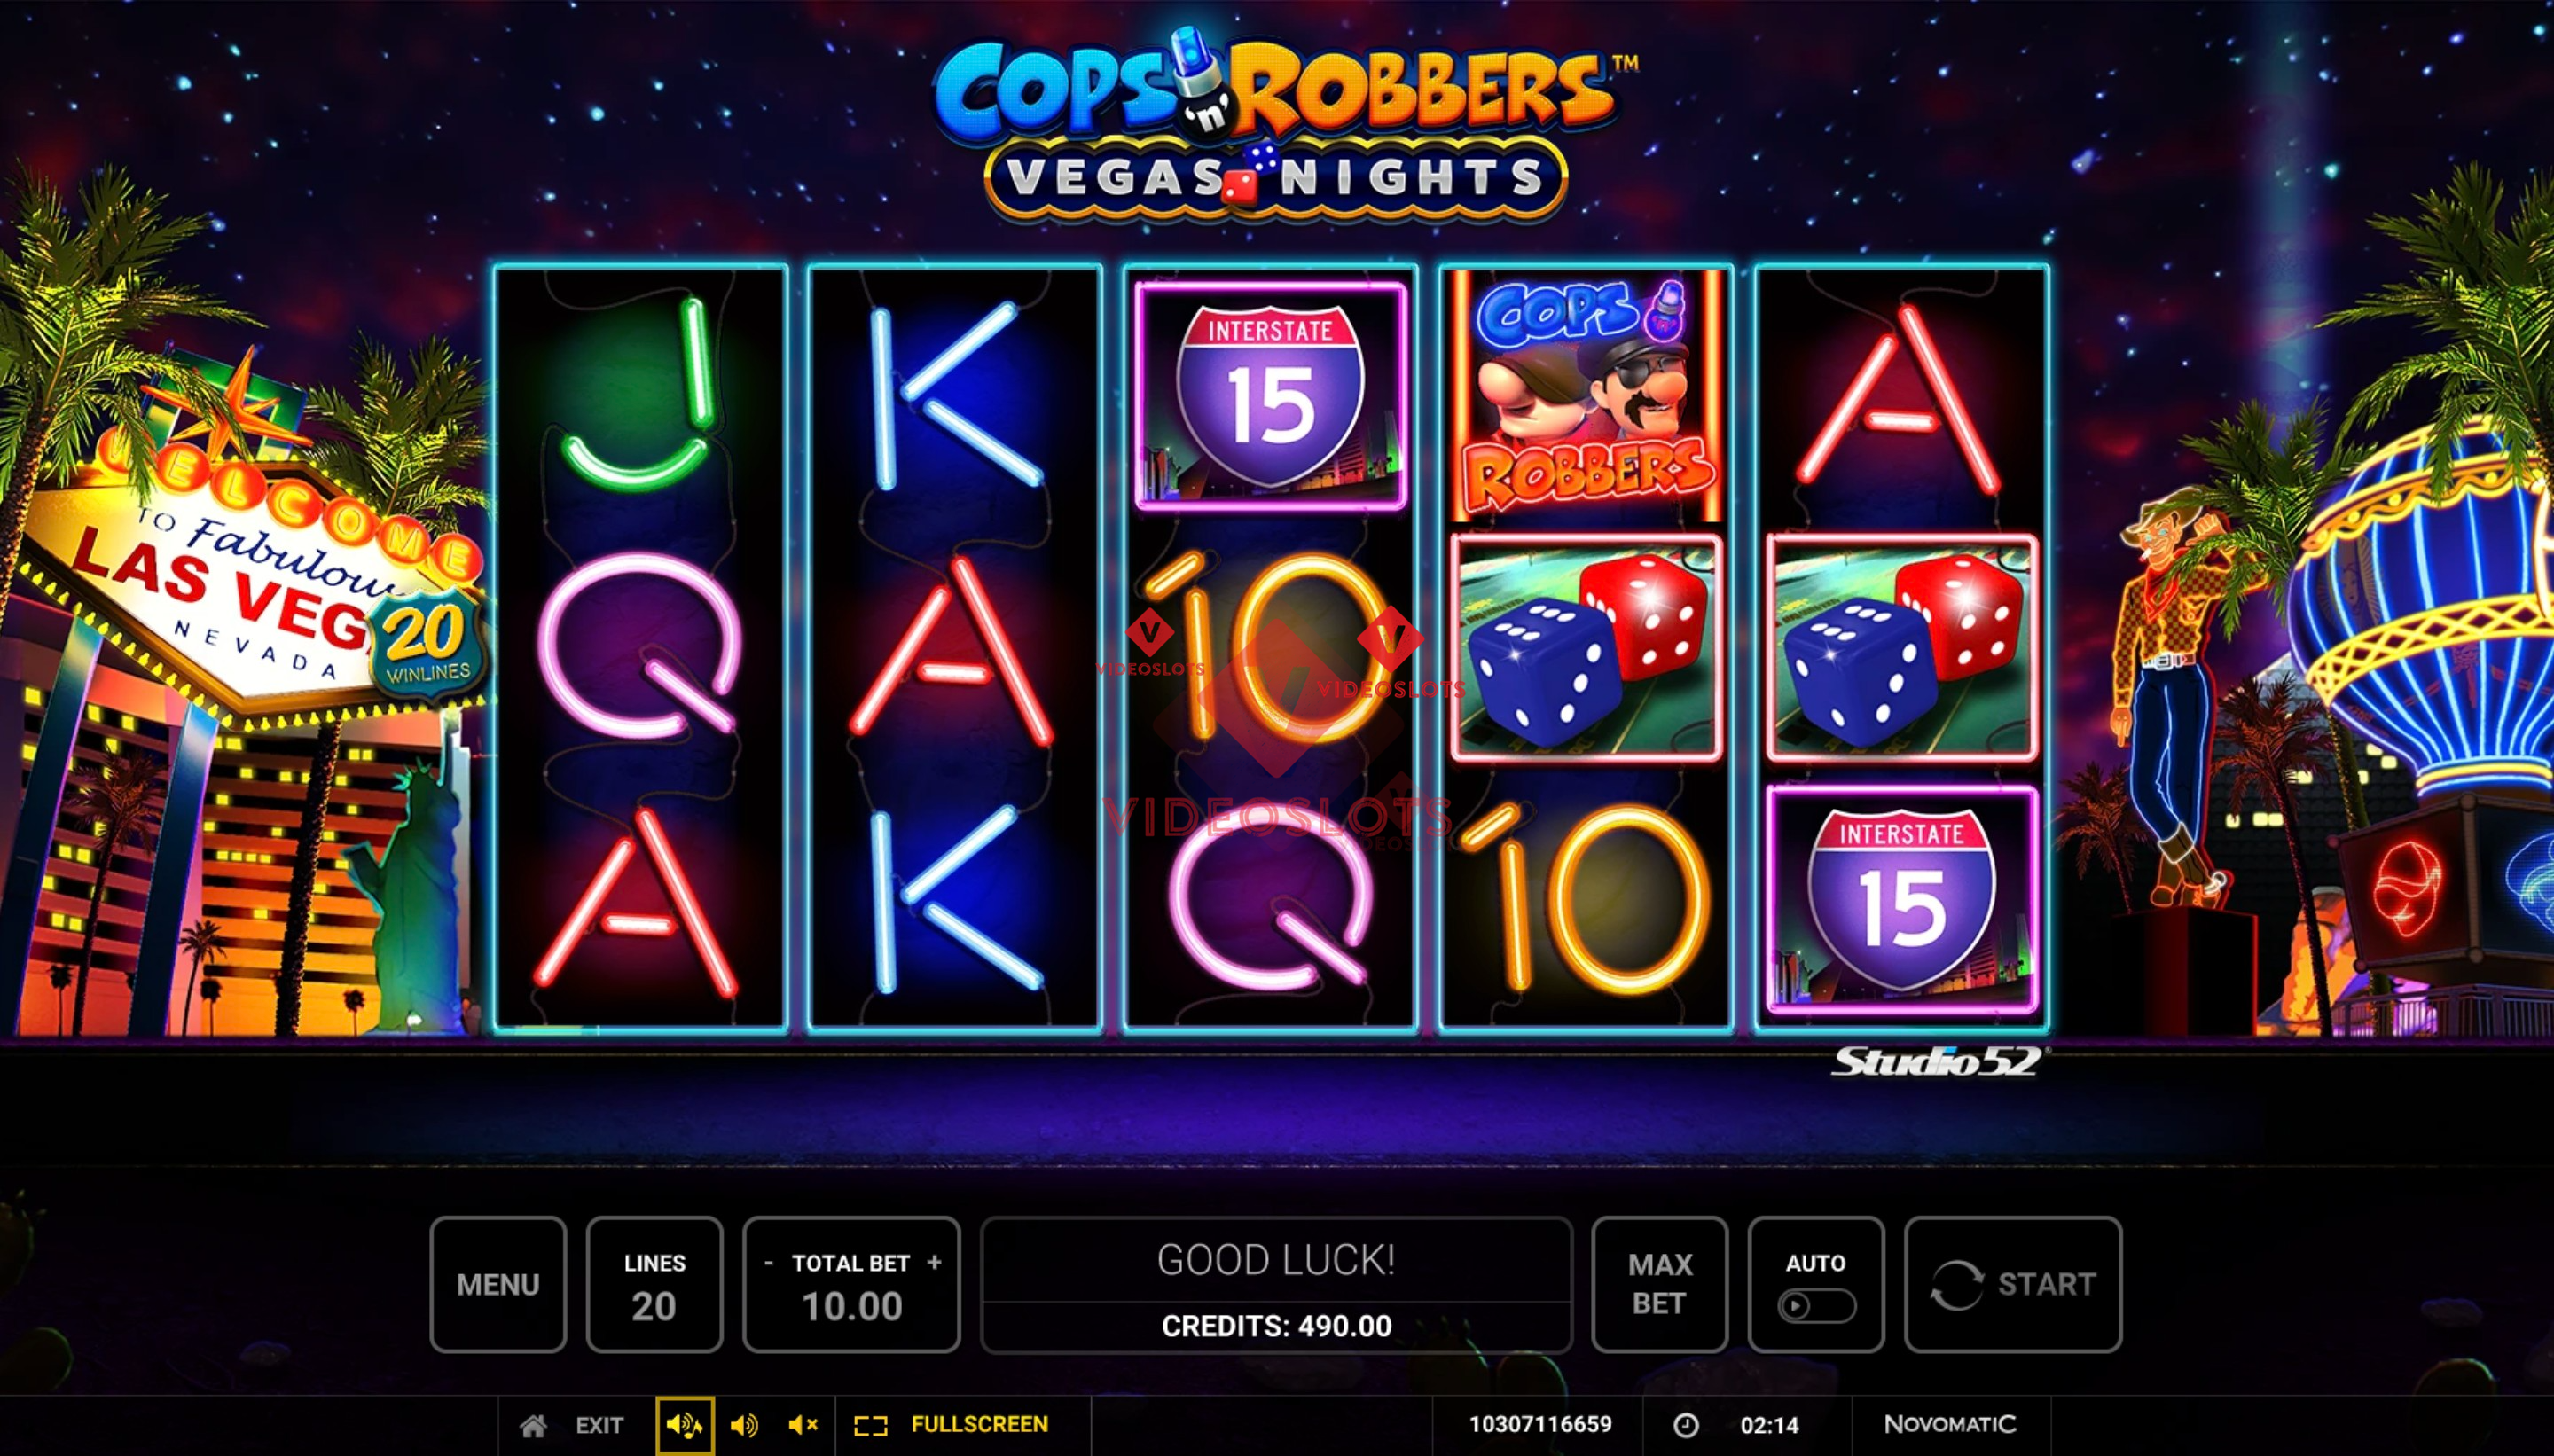 Base Game for Cops 'n' Robbers Vegas Nights slot from Greentube